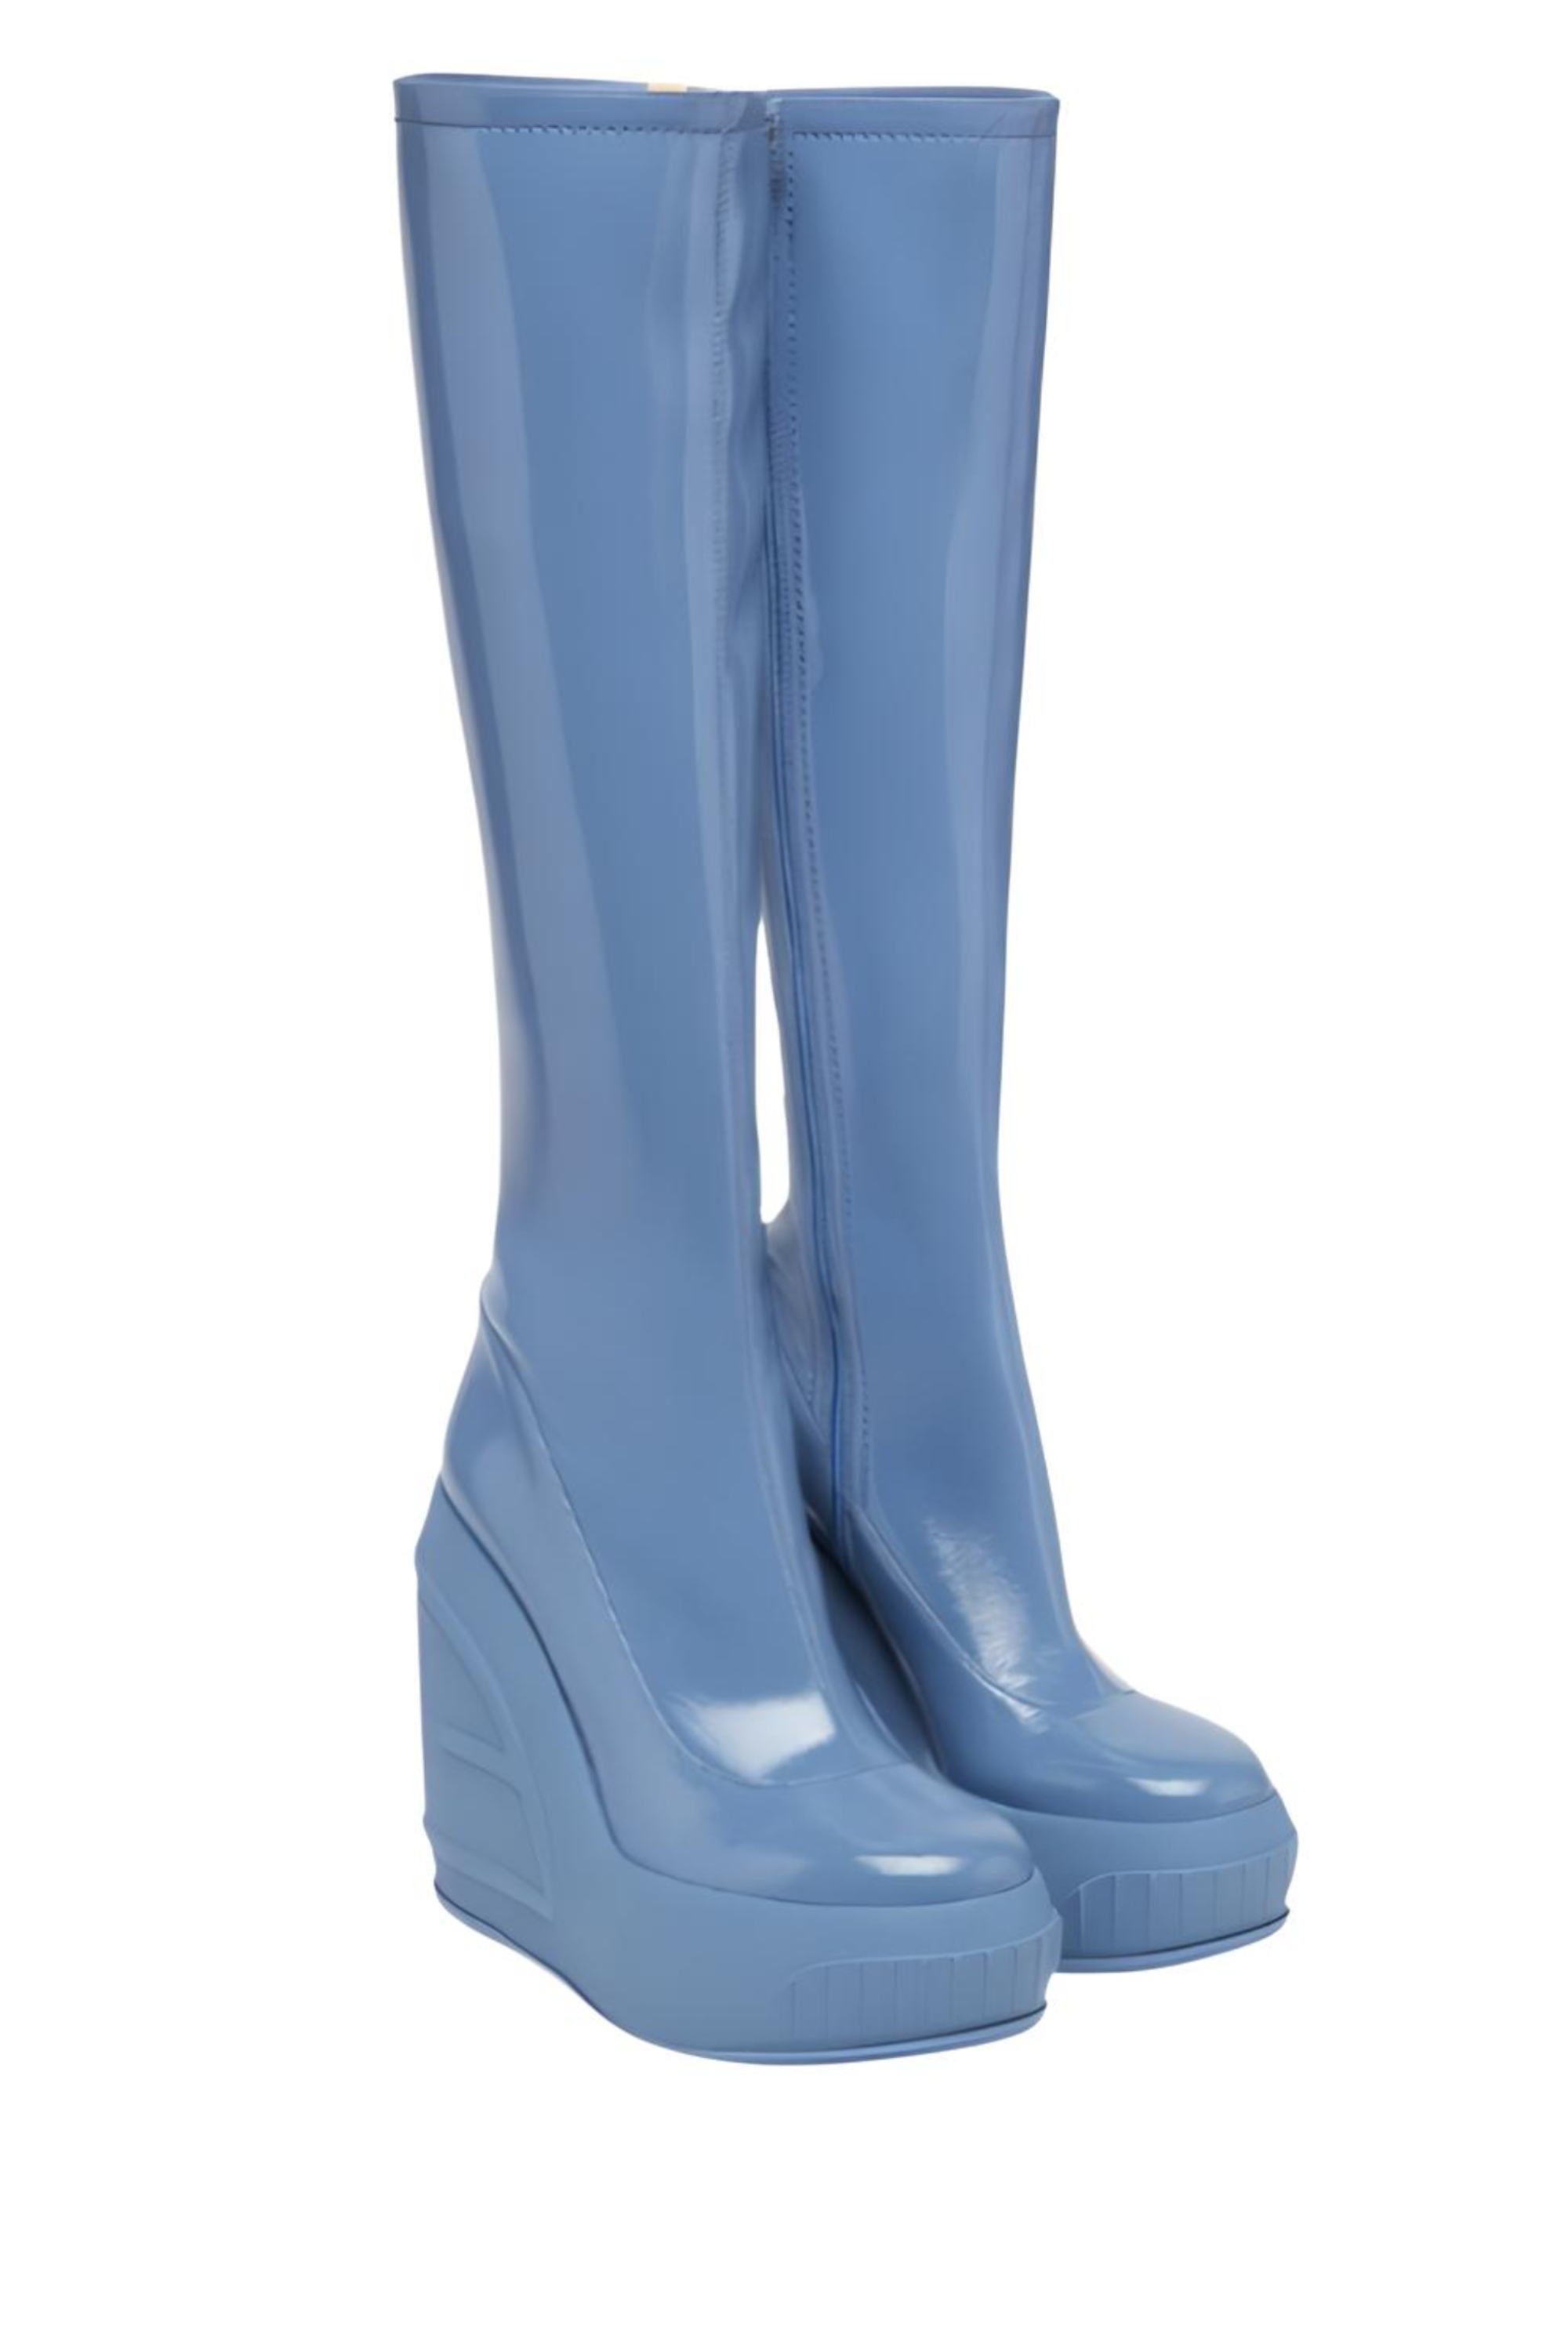 Coliseo Boots - Dusty Blue